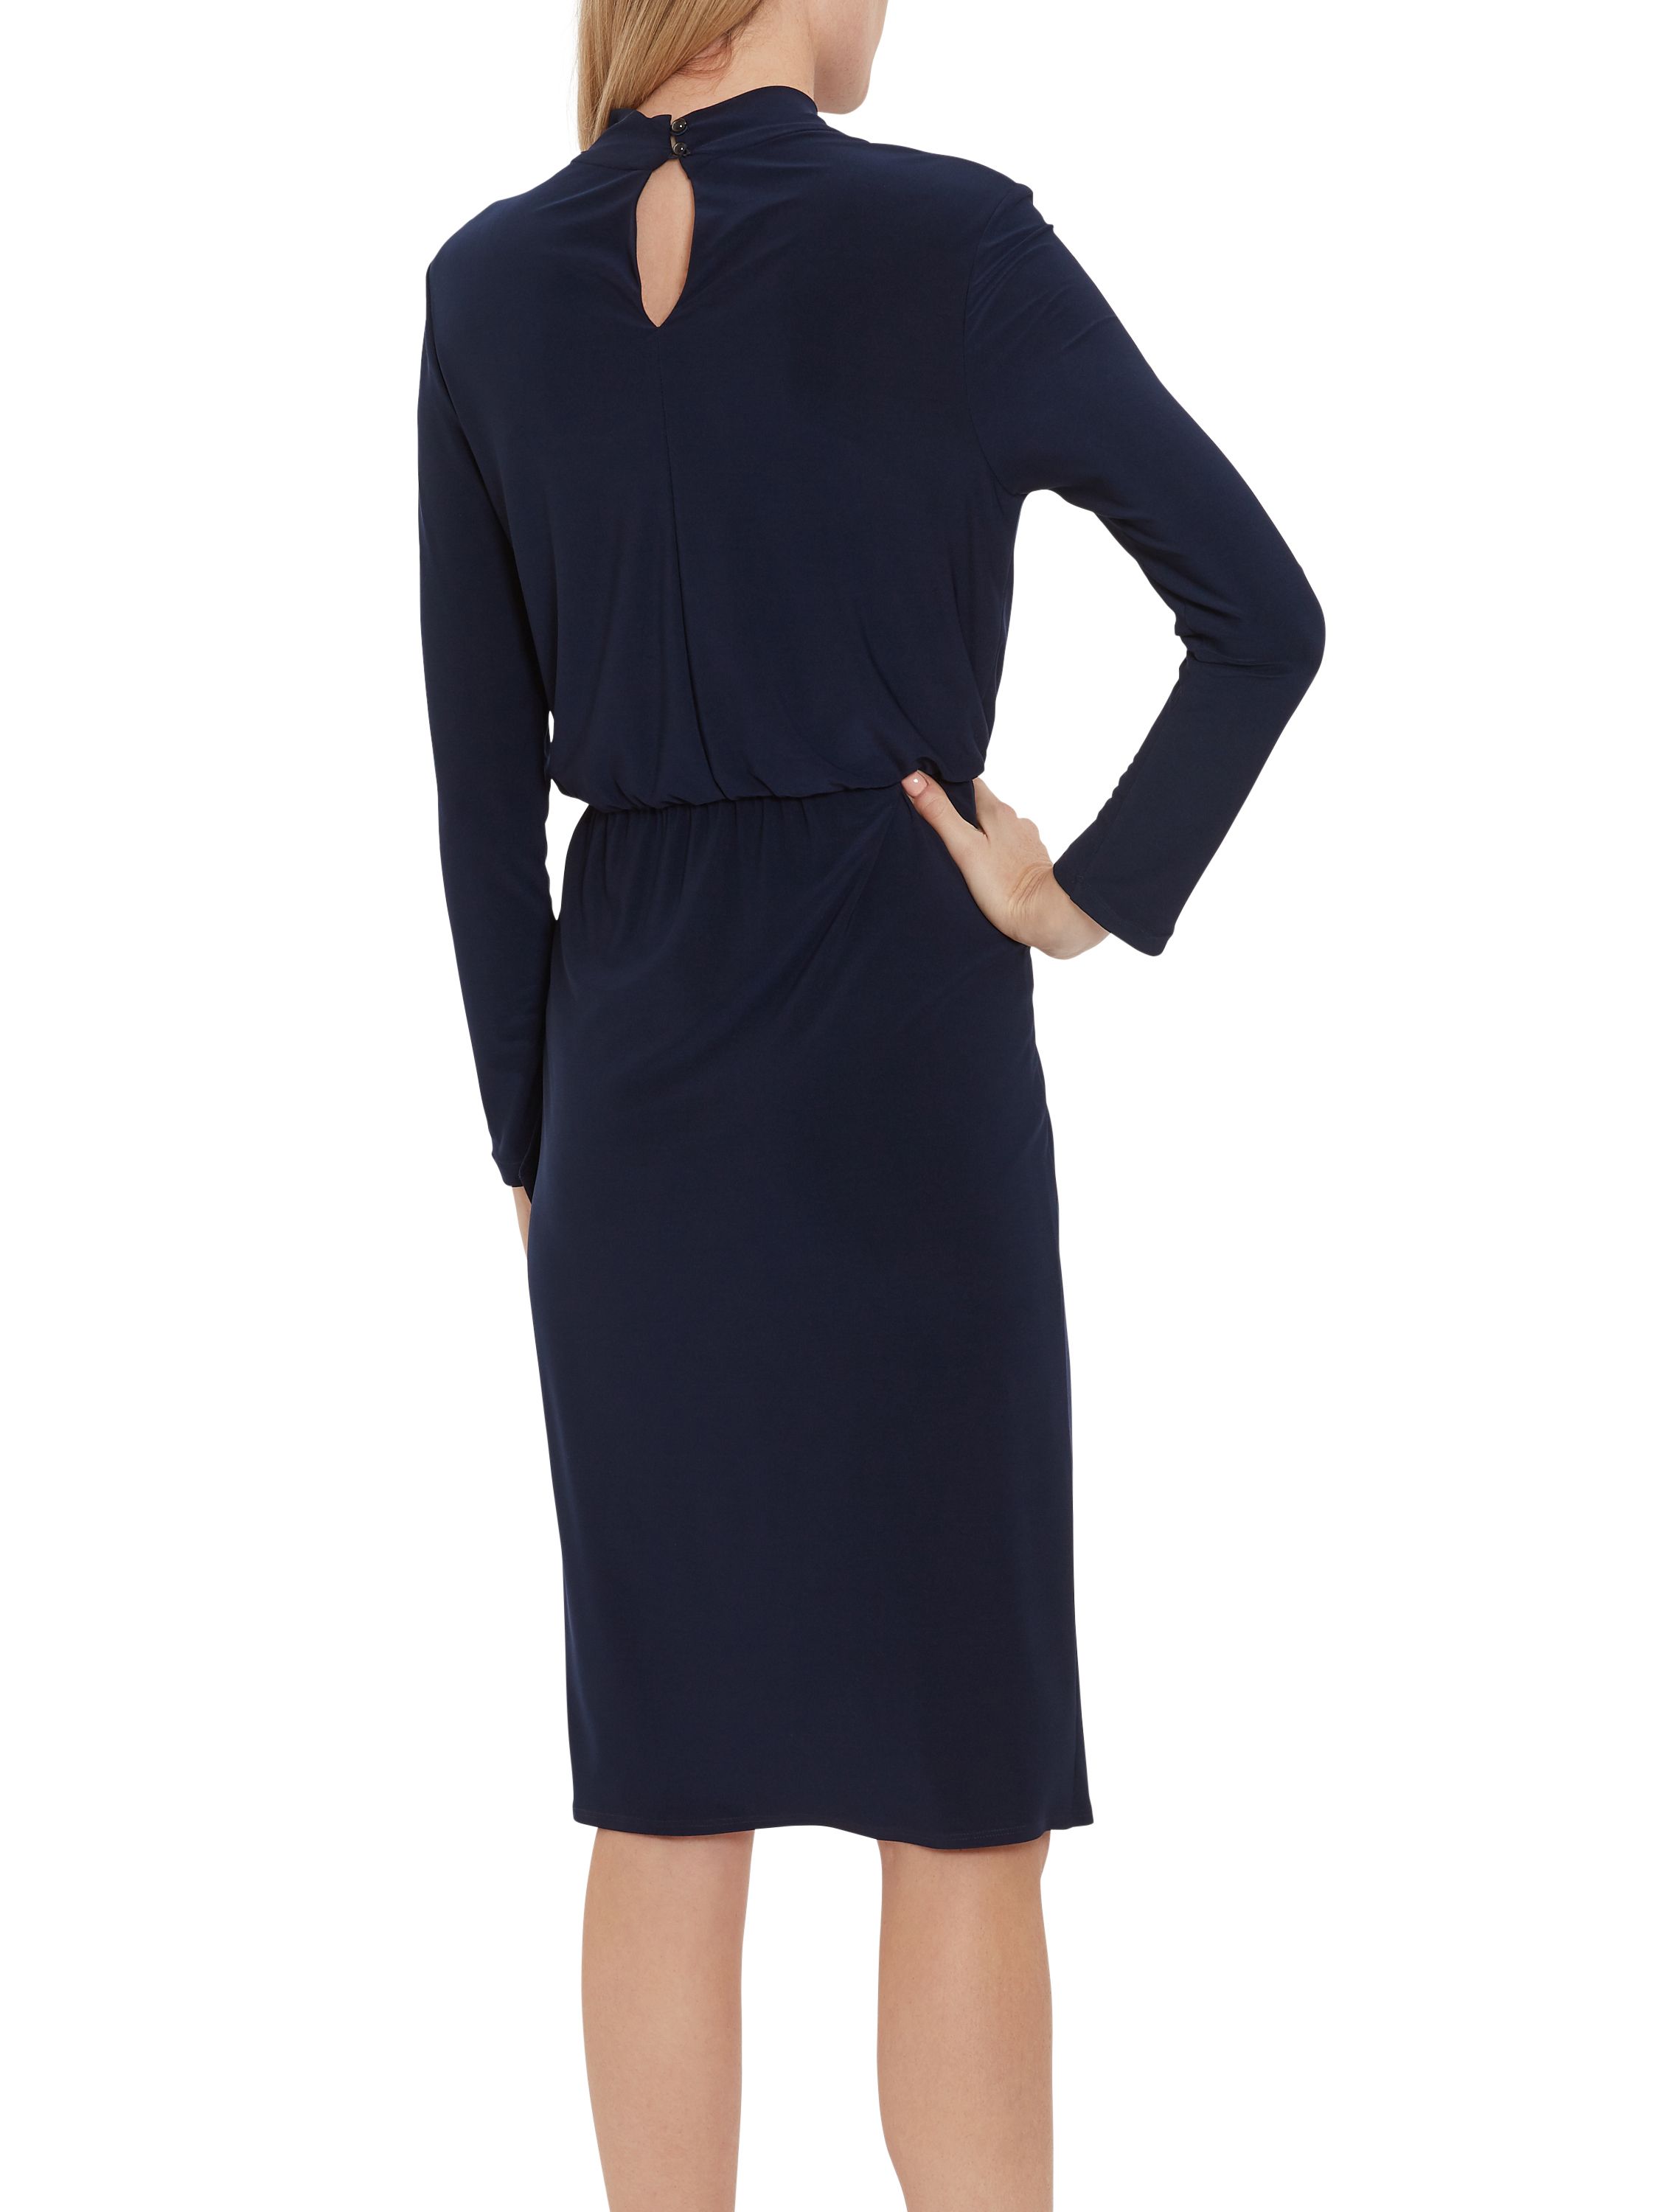 Feel fabulous in this soft stretch jersey dress by Gina Bacconi. It has long sleeves and keyhole neck detailing, with delicate ruching at the waistline and a wrap over style finish. Perfect for day to evening wear. The dress is fully lined.